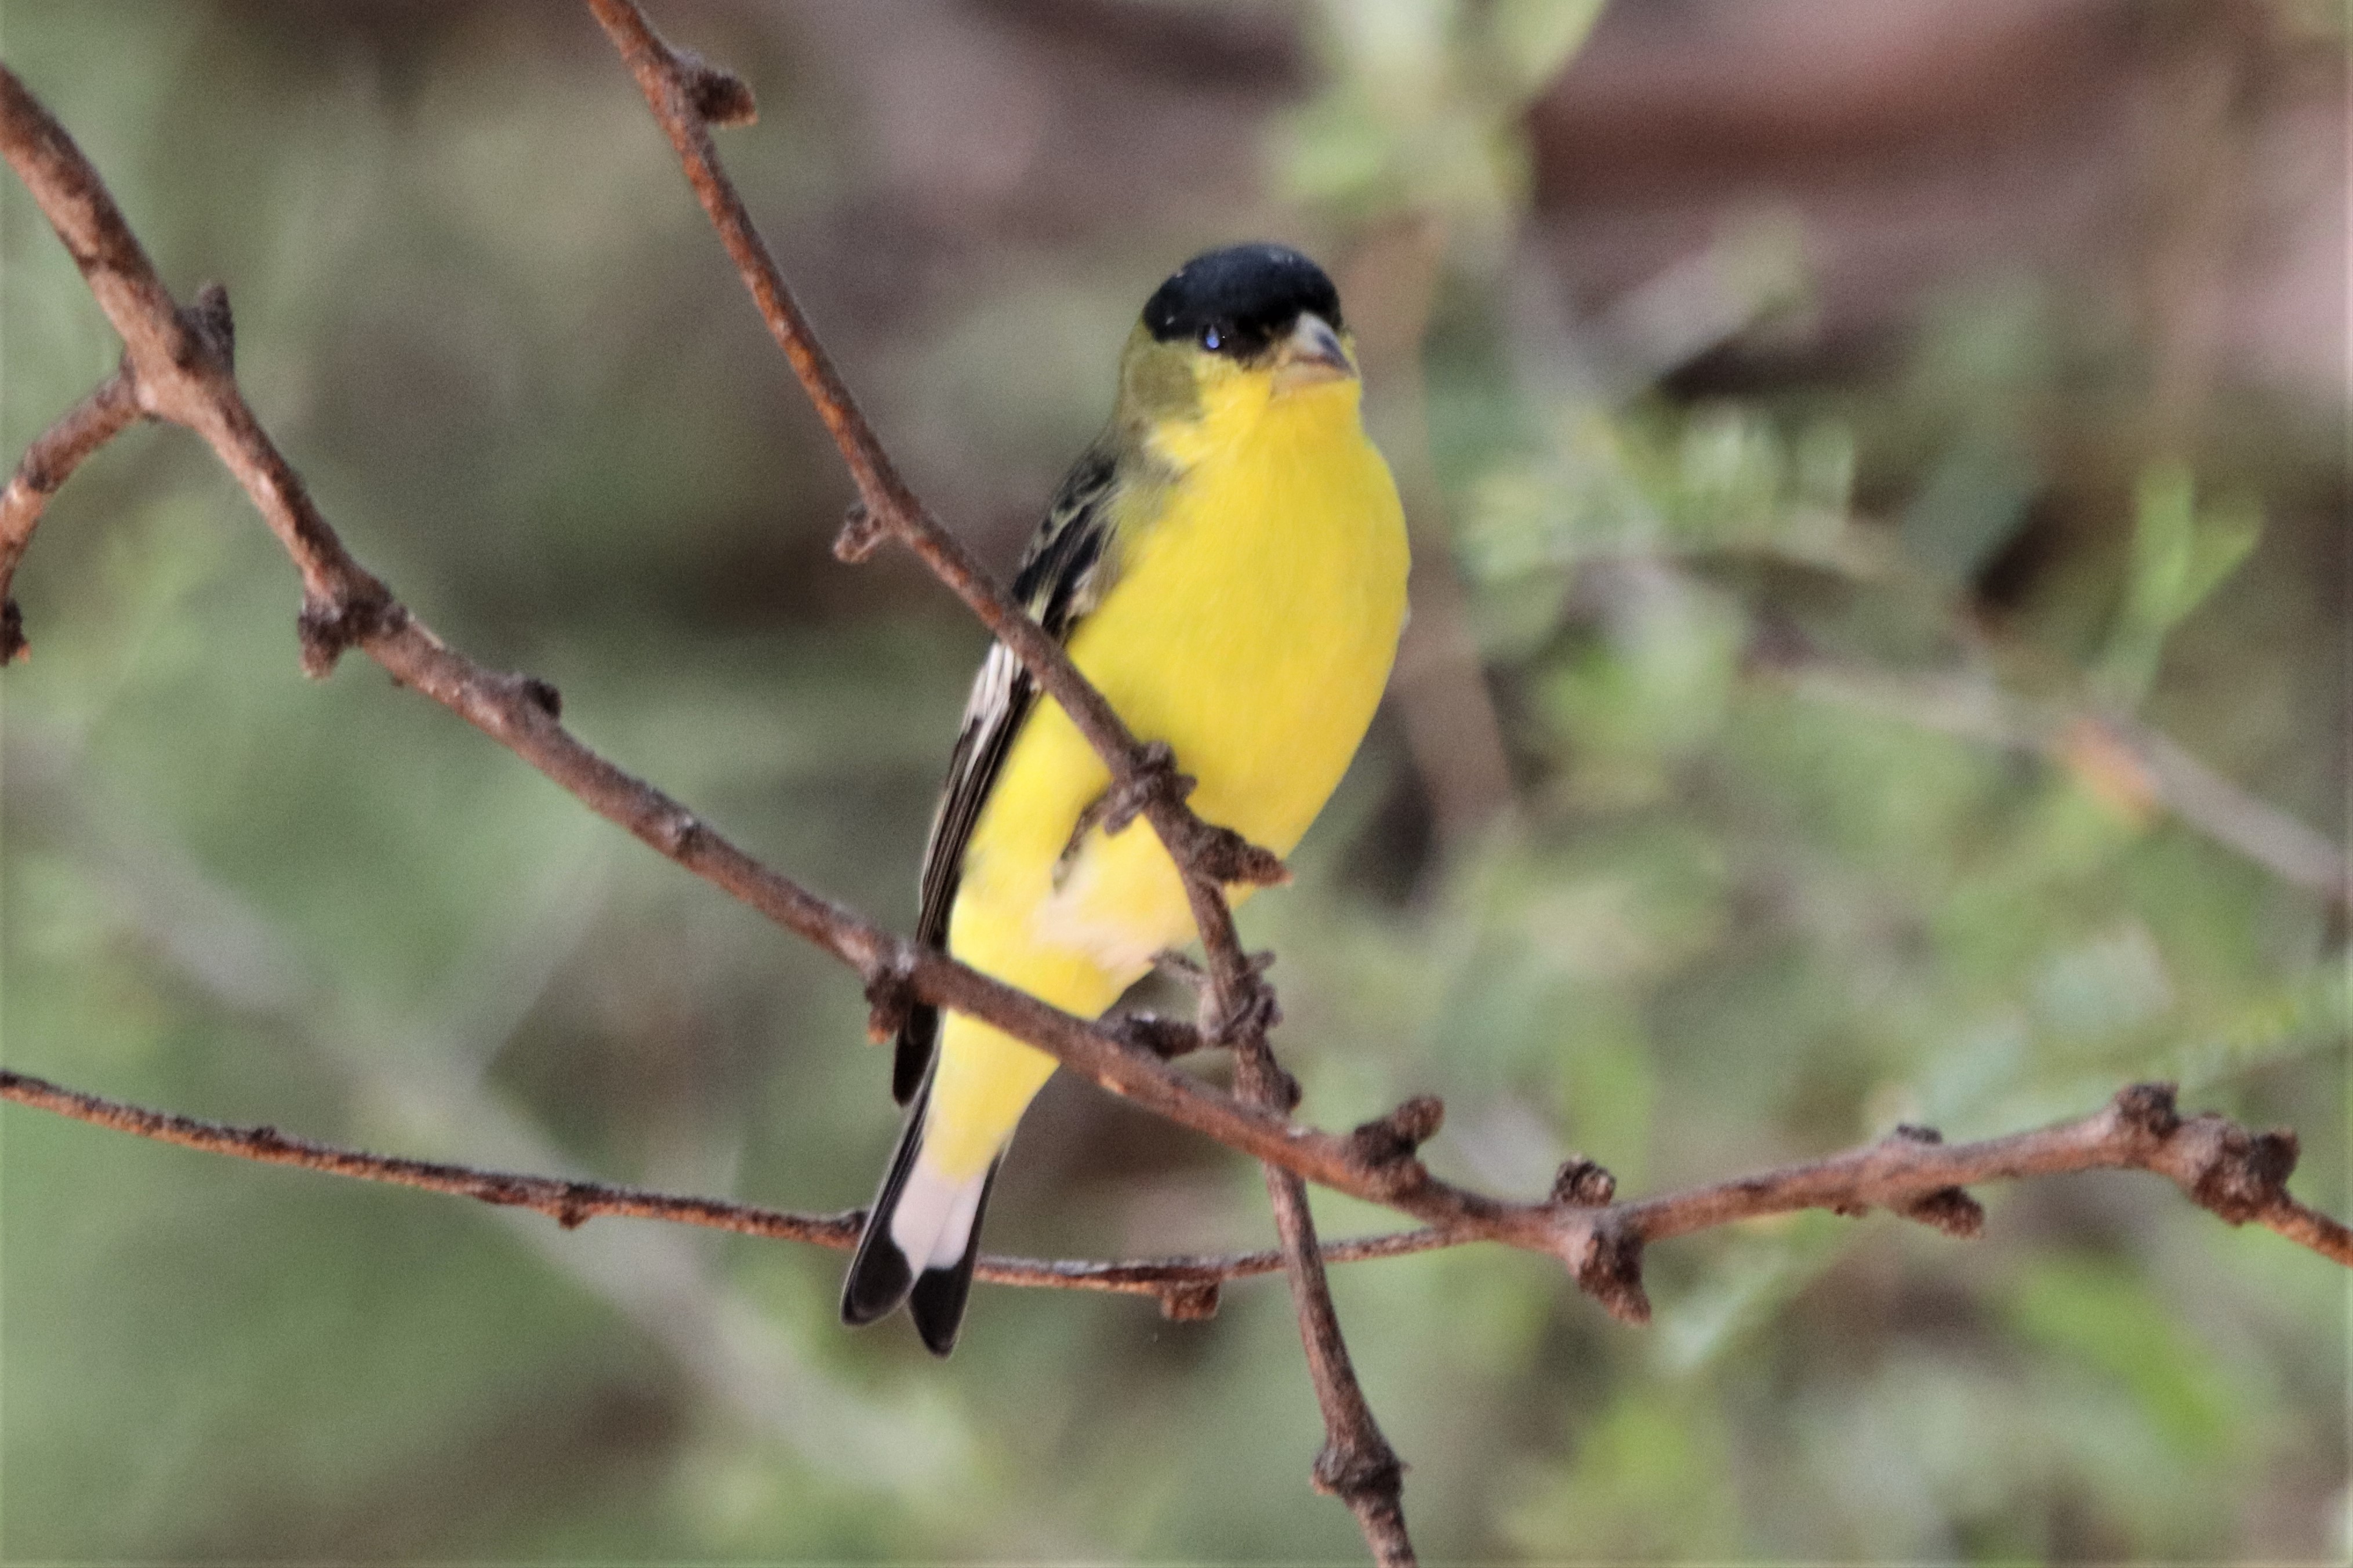 Photo by Buddy Walker  |  Lesser Goldfinch:  "Posing, displaying excellent feather condition"